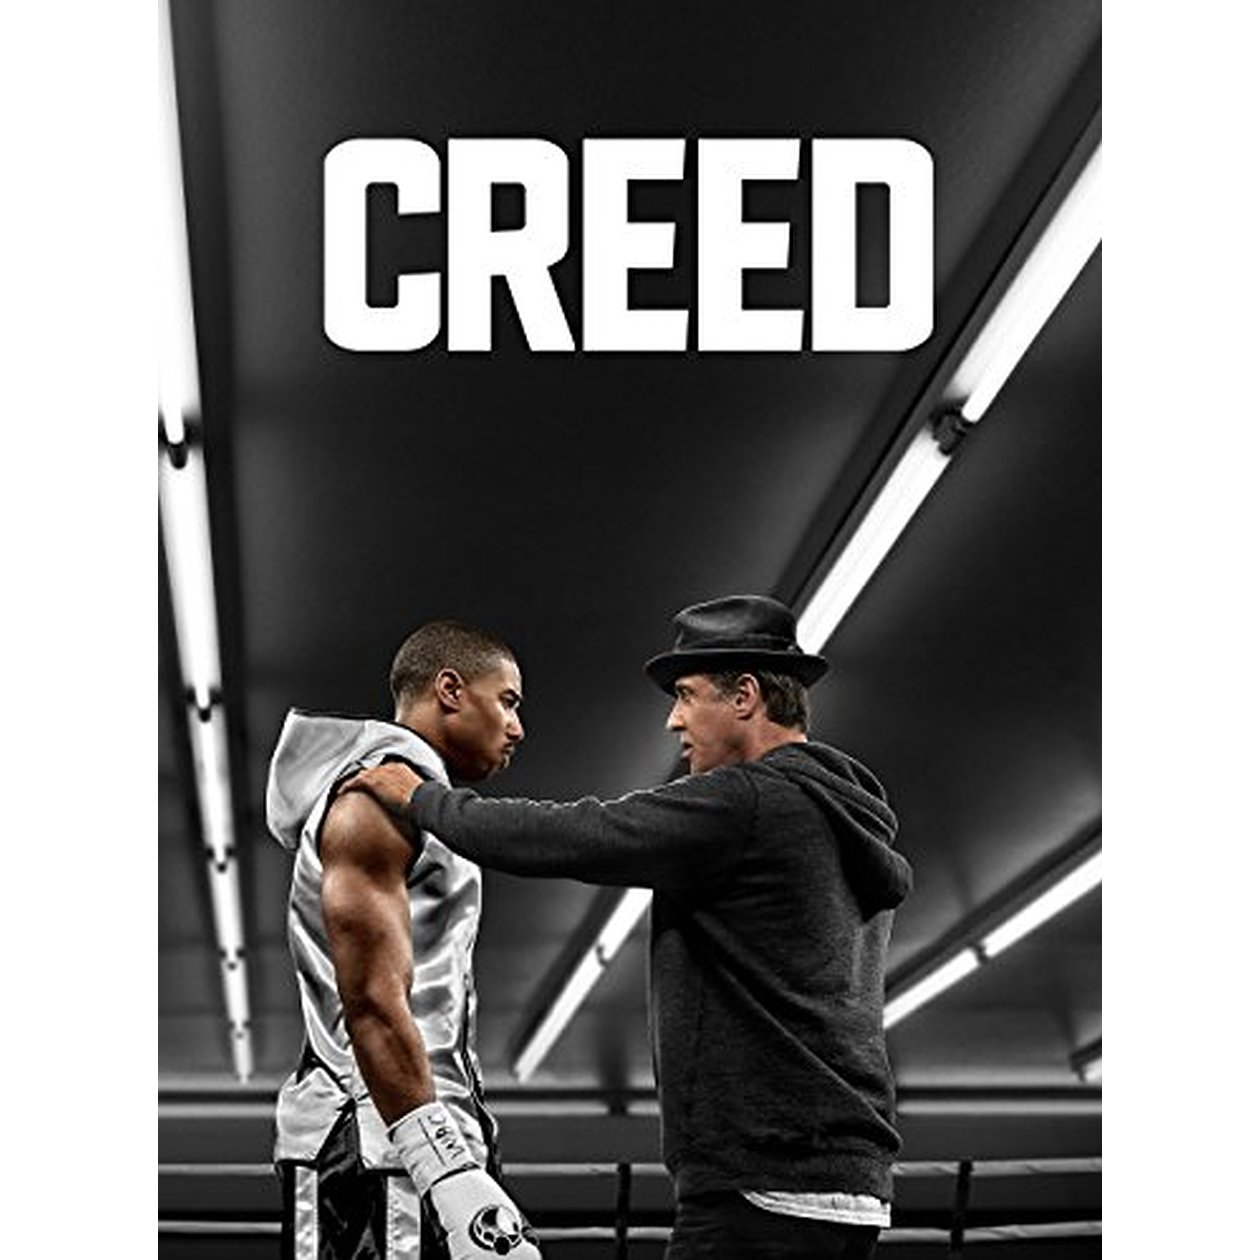 Rent Creed on Amazon Instant Video – Just $.99!